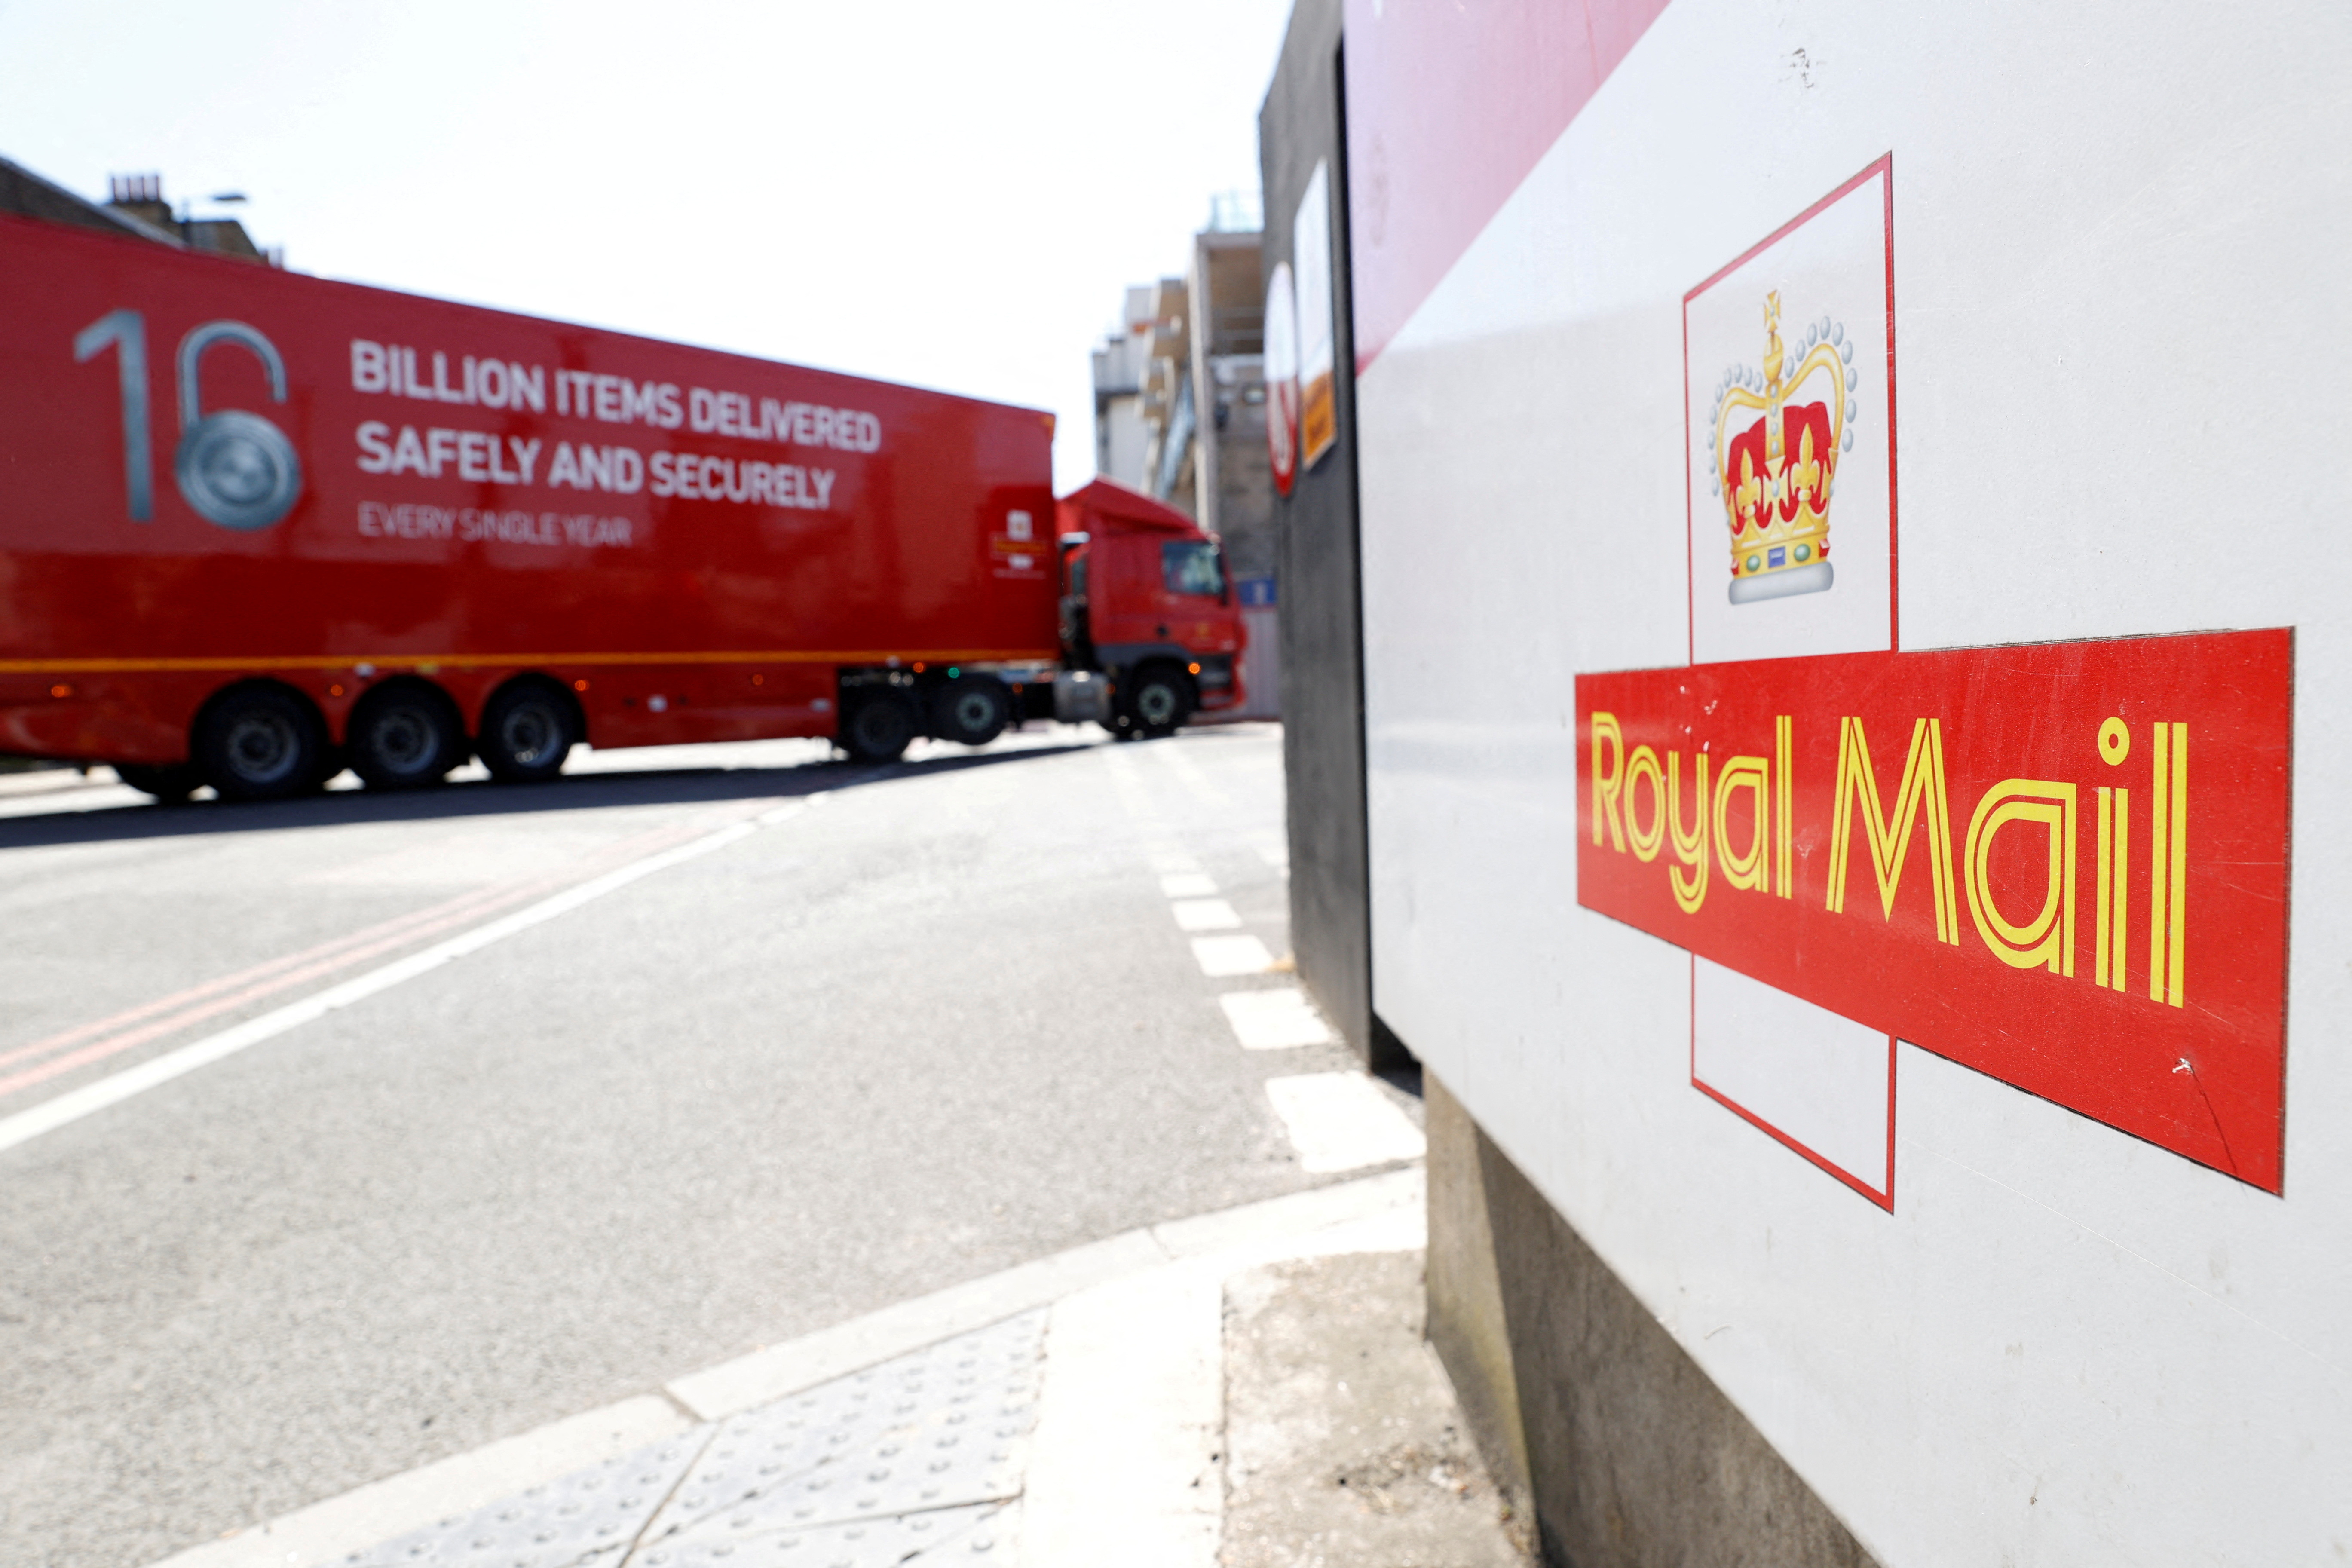 The logo of Royal Mail is seen outside the Mount Pleasant Sorting Office as a delivery vehicle arrives, in London